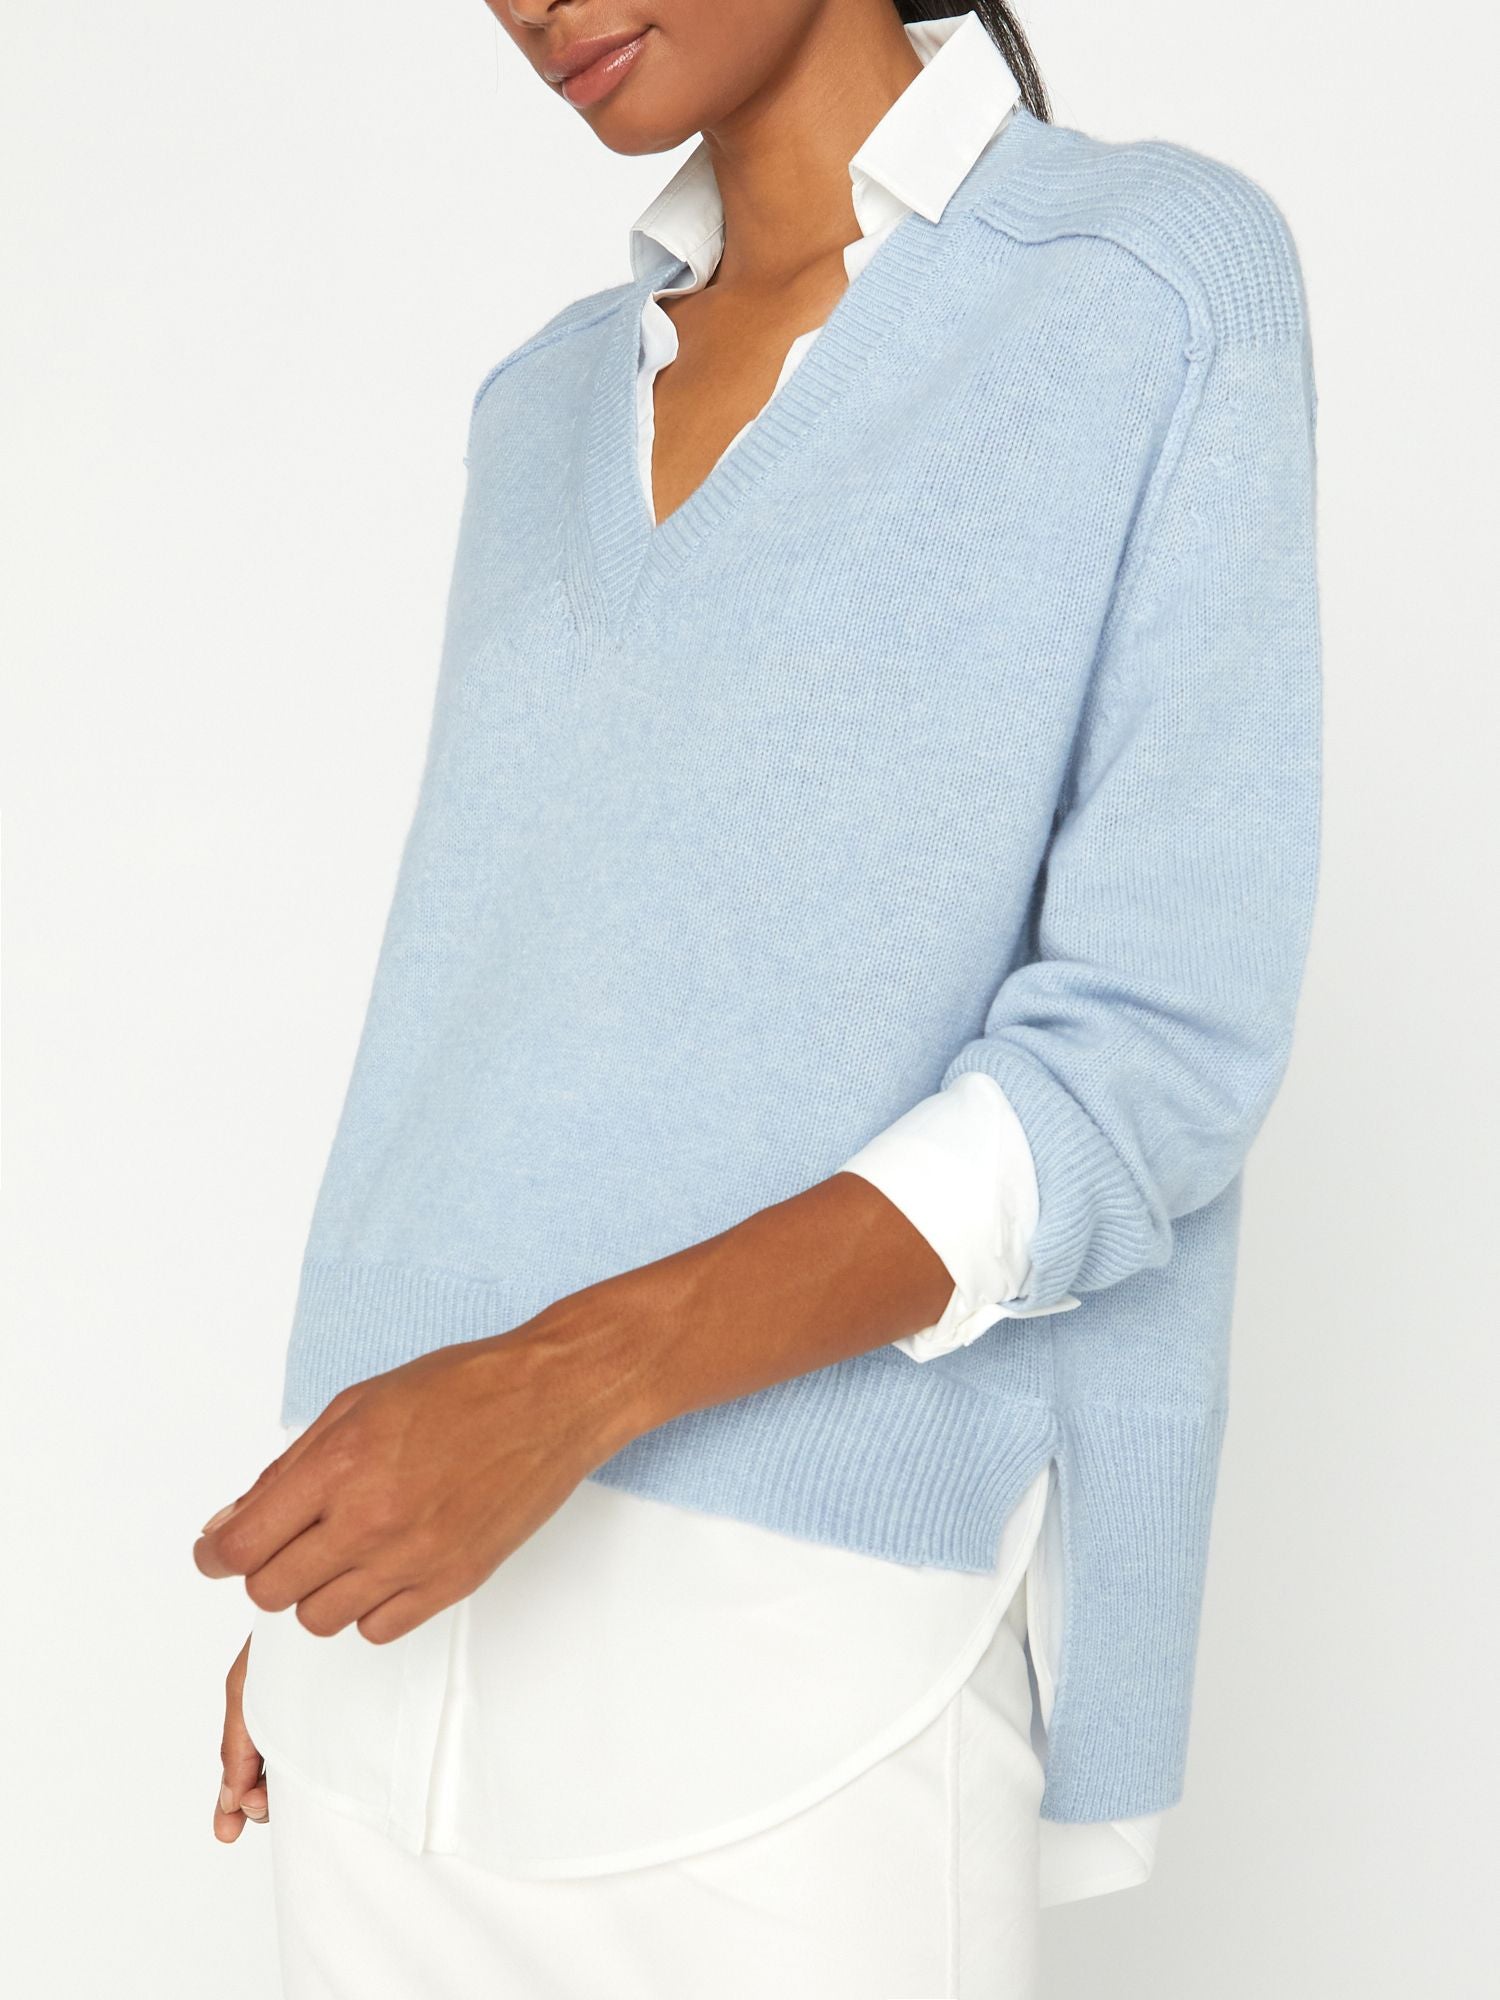 Looker light blue layered v-neck sweater side view 2